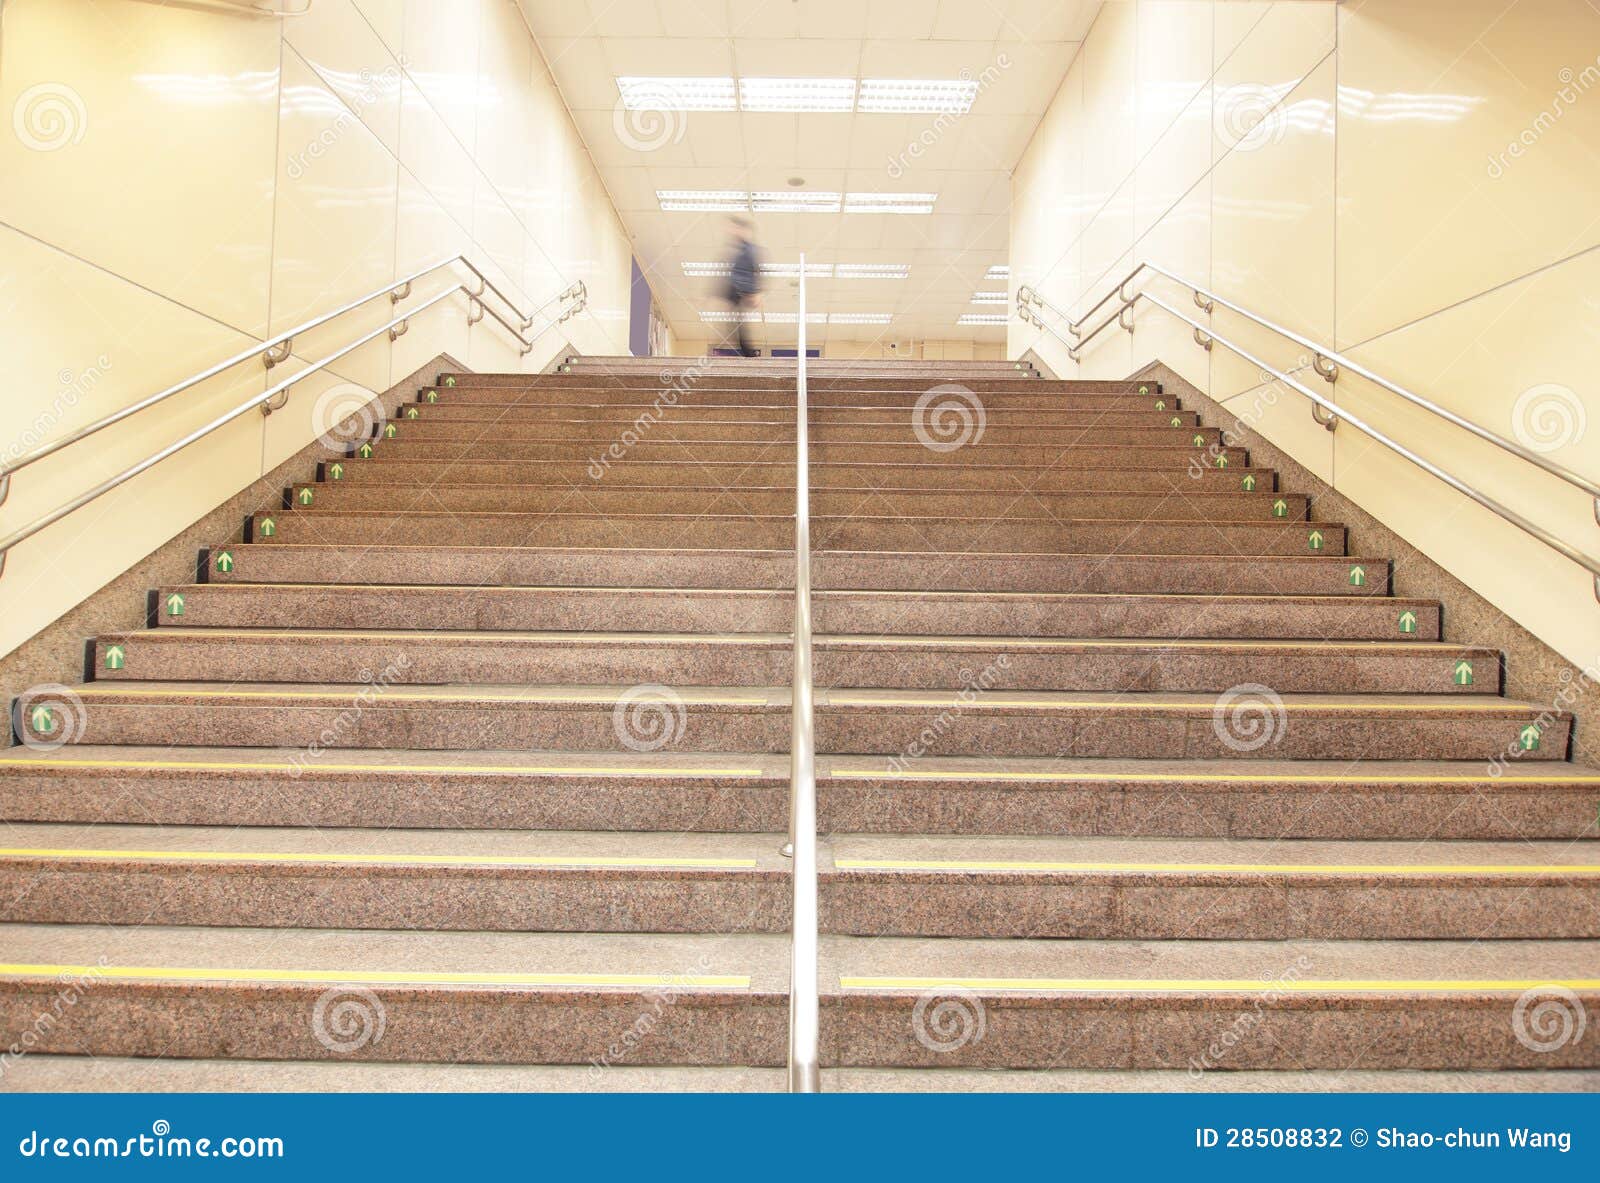 Stairs at a Metro Railway Station Stock Photo - Image of passage ...